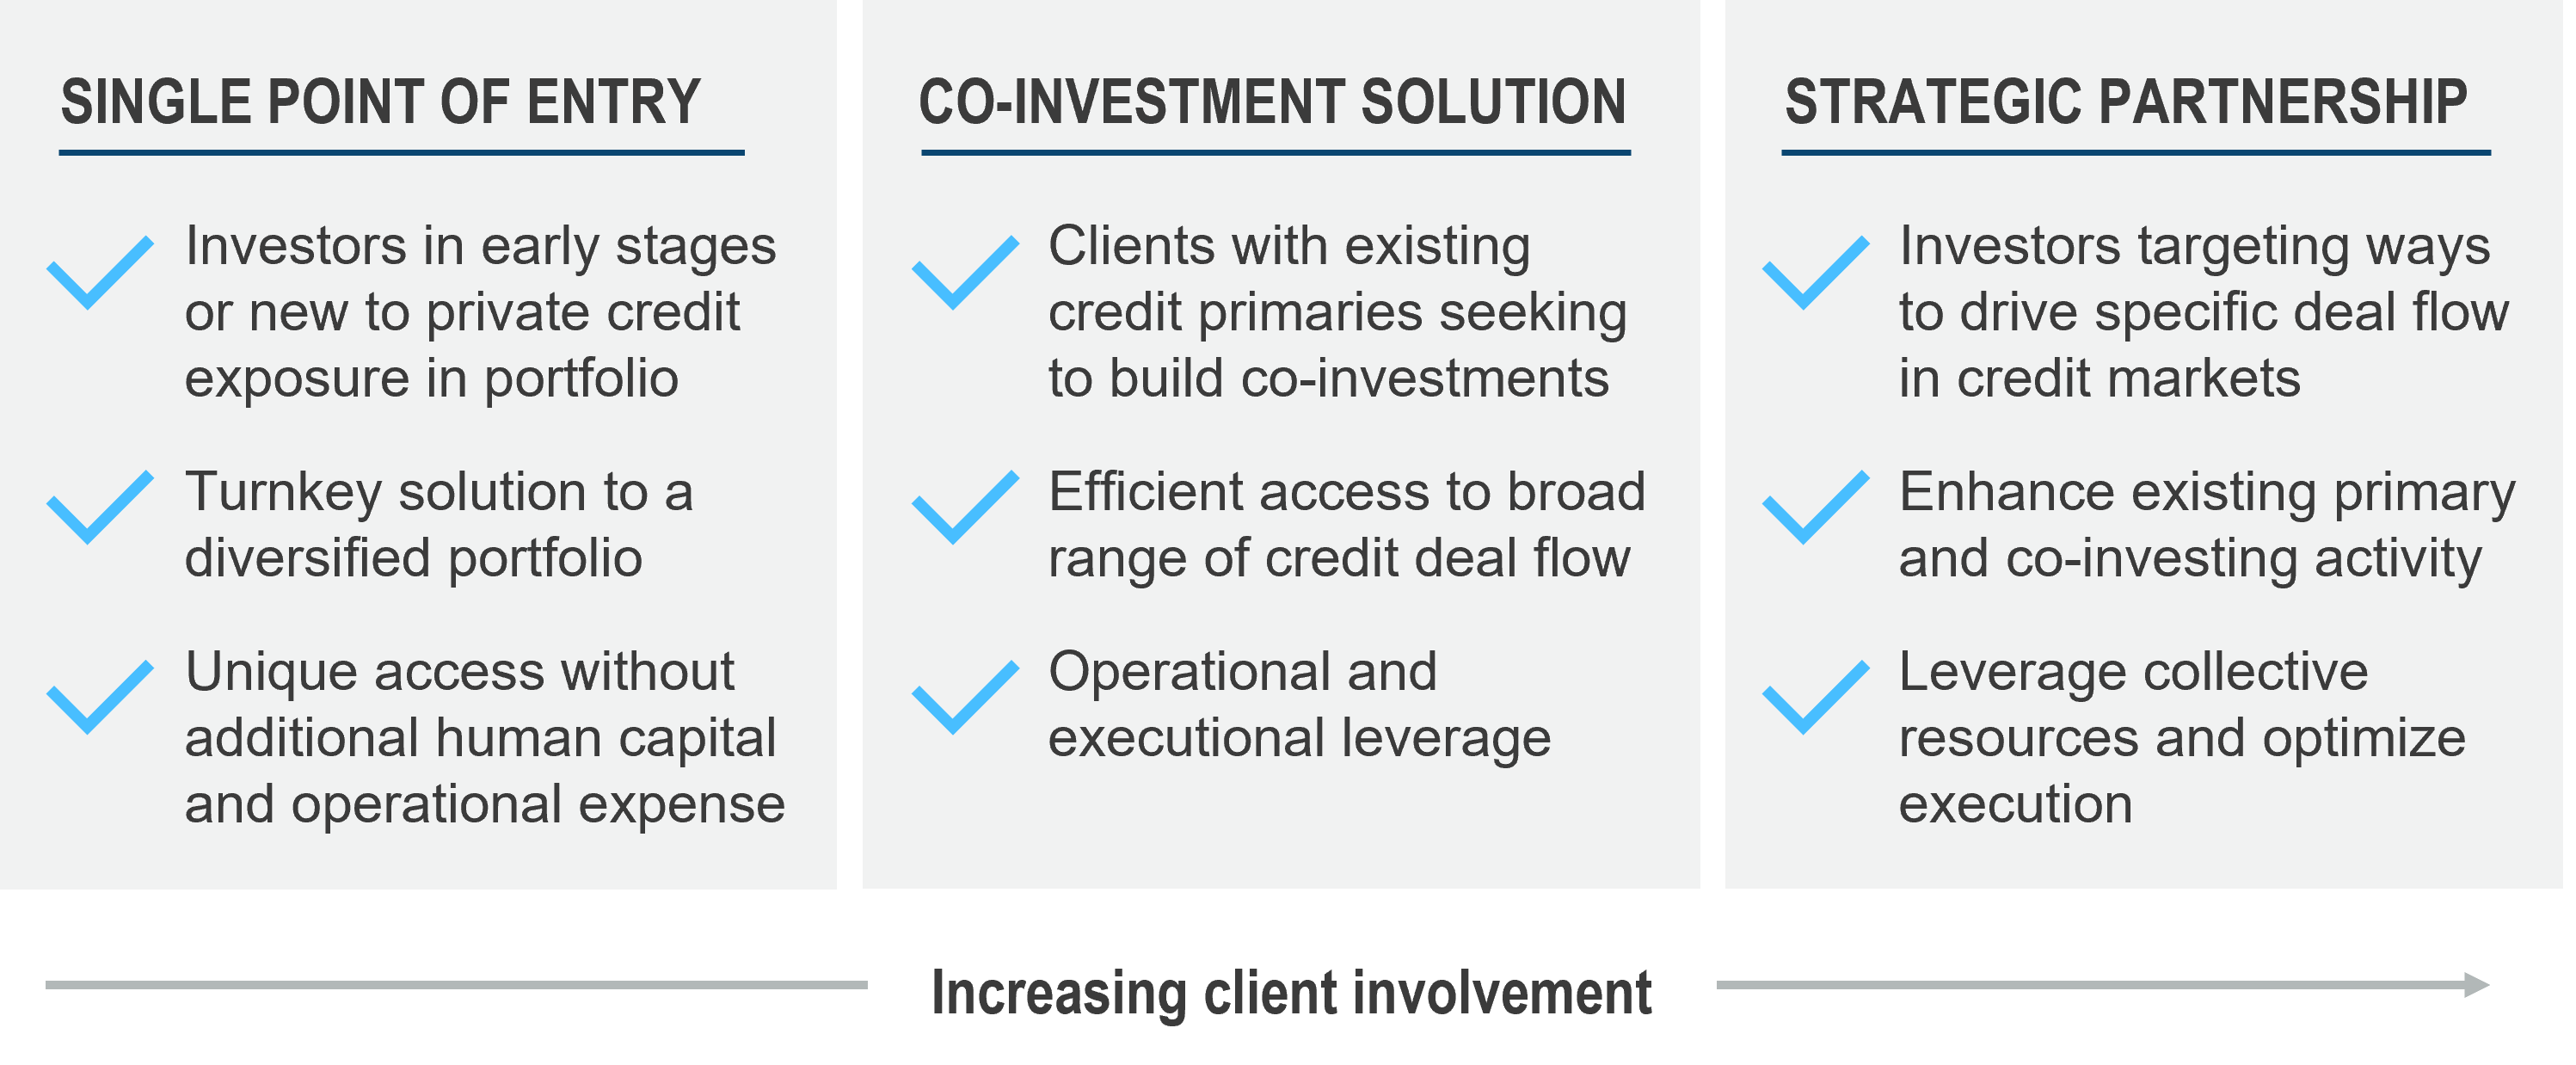 Ways GCM Grosvenor can partner with investors in private credit including a single point of entry, co-investment, and strategic partnership.